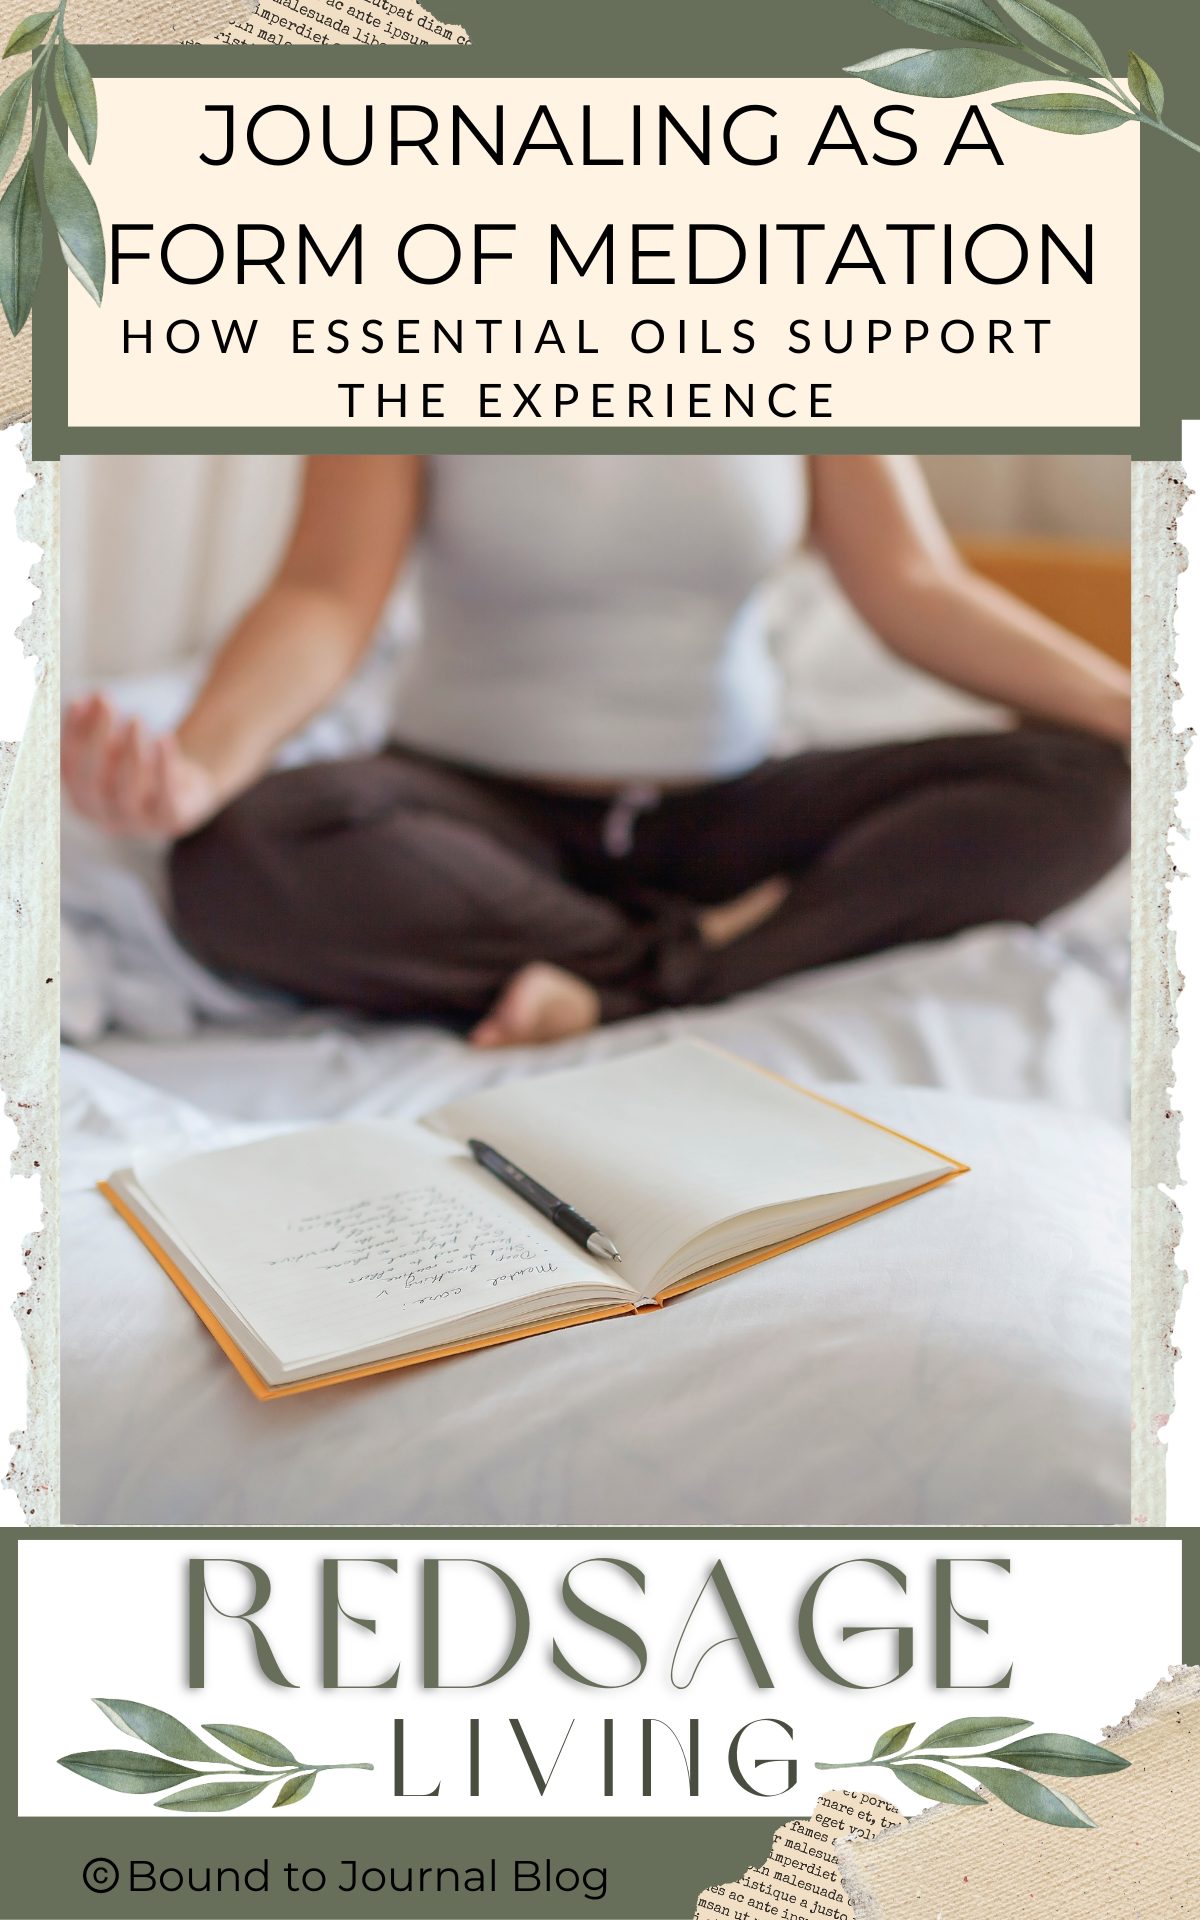 person sitting on a bed in meditation pose with journal on the pillow in front image for post Journaling as a form of meditation: How essentail oils support the experience